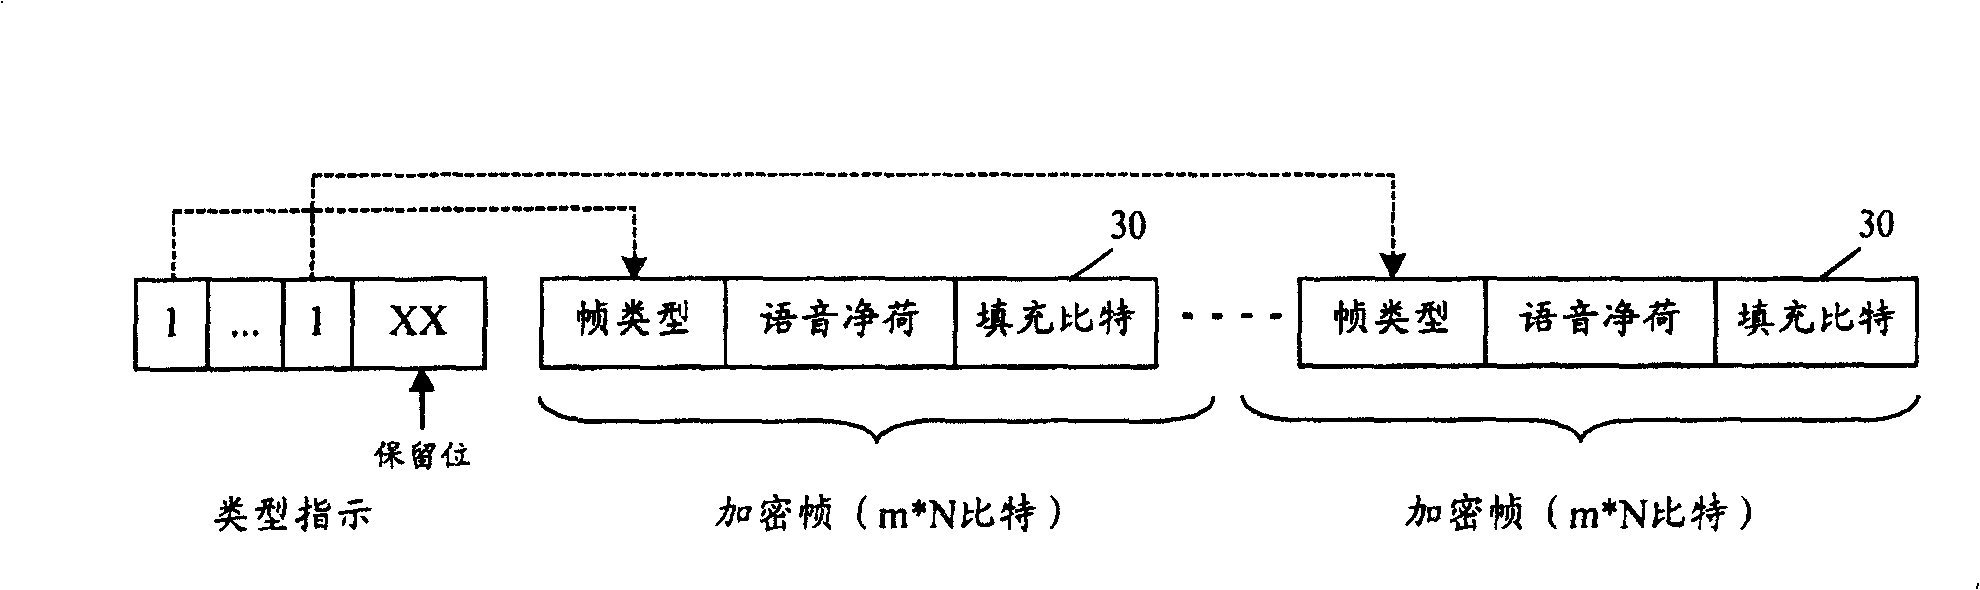 Method for realizing end-to-end phonetic encryption